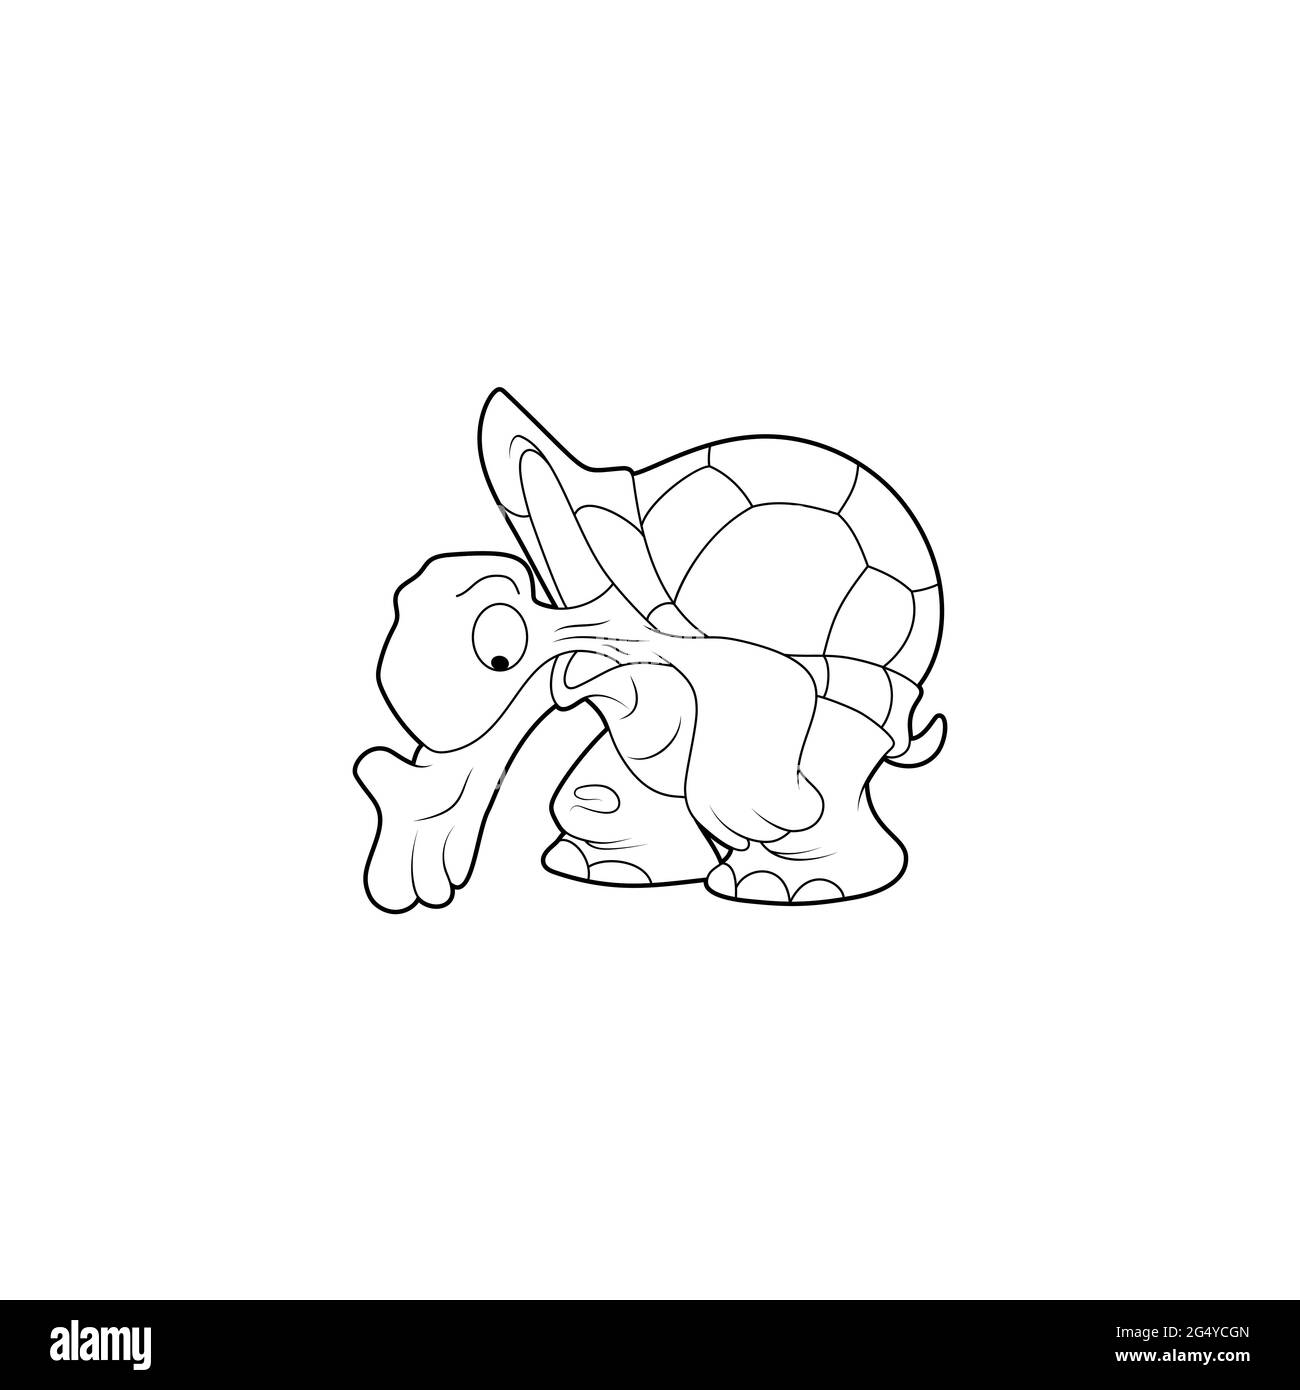 Coloring book for kids. Cartoon character. Turtle is pointing down. Black contour silhouette. Isolated on white background. Animal theme. Vector illus Stock Vector